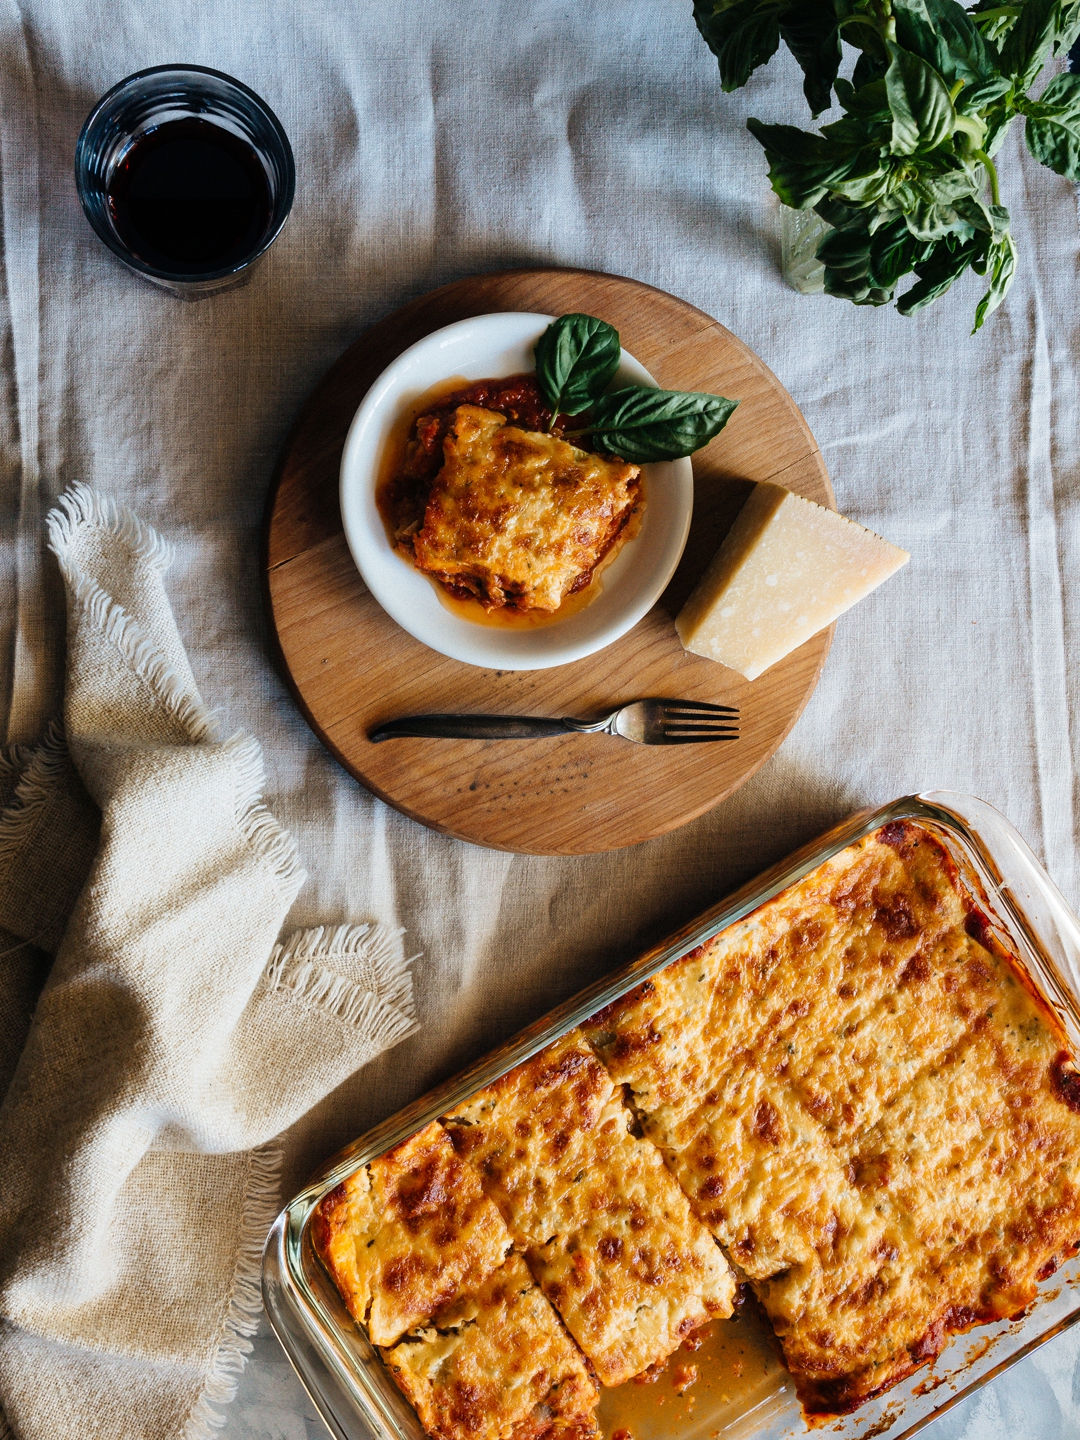 Overhead shot of a slice of zucchini lasagna on a plate surrounded by a glass of wine, basil, parmesan cheese, a fork, and a baking dish of lasagna